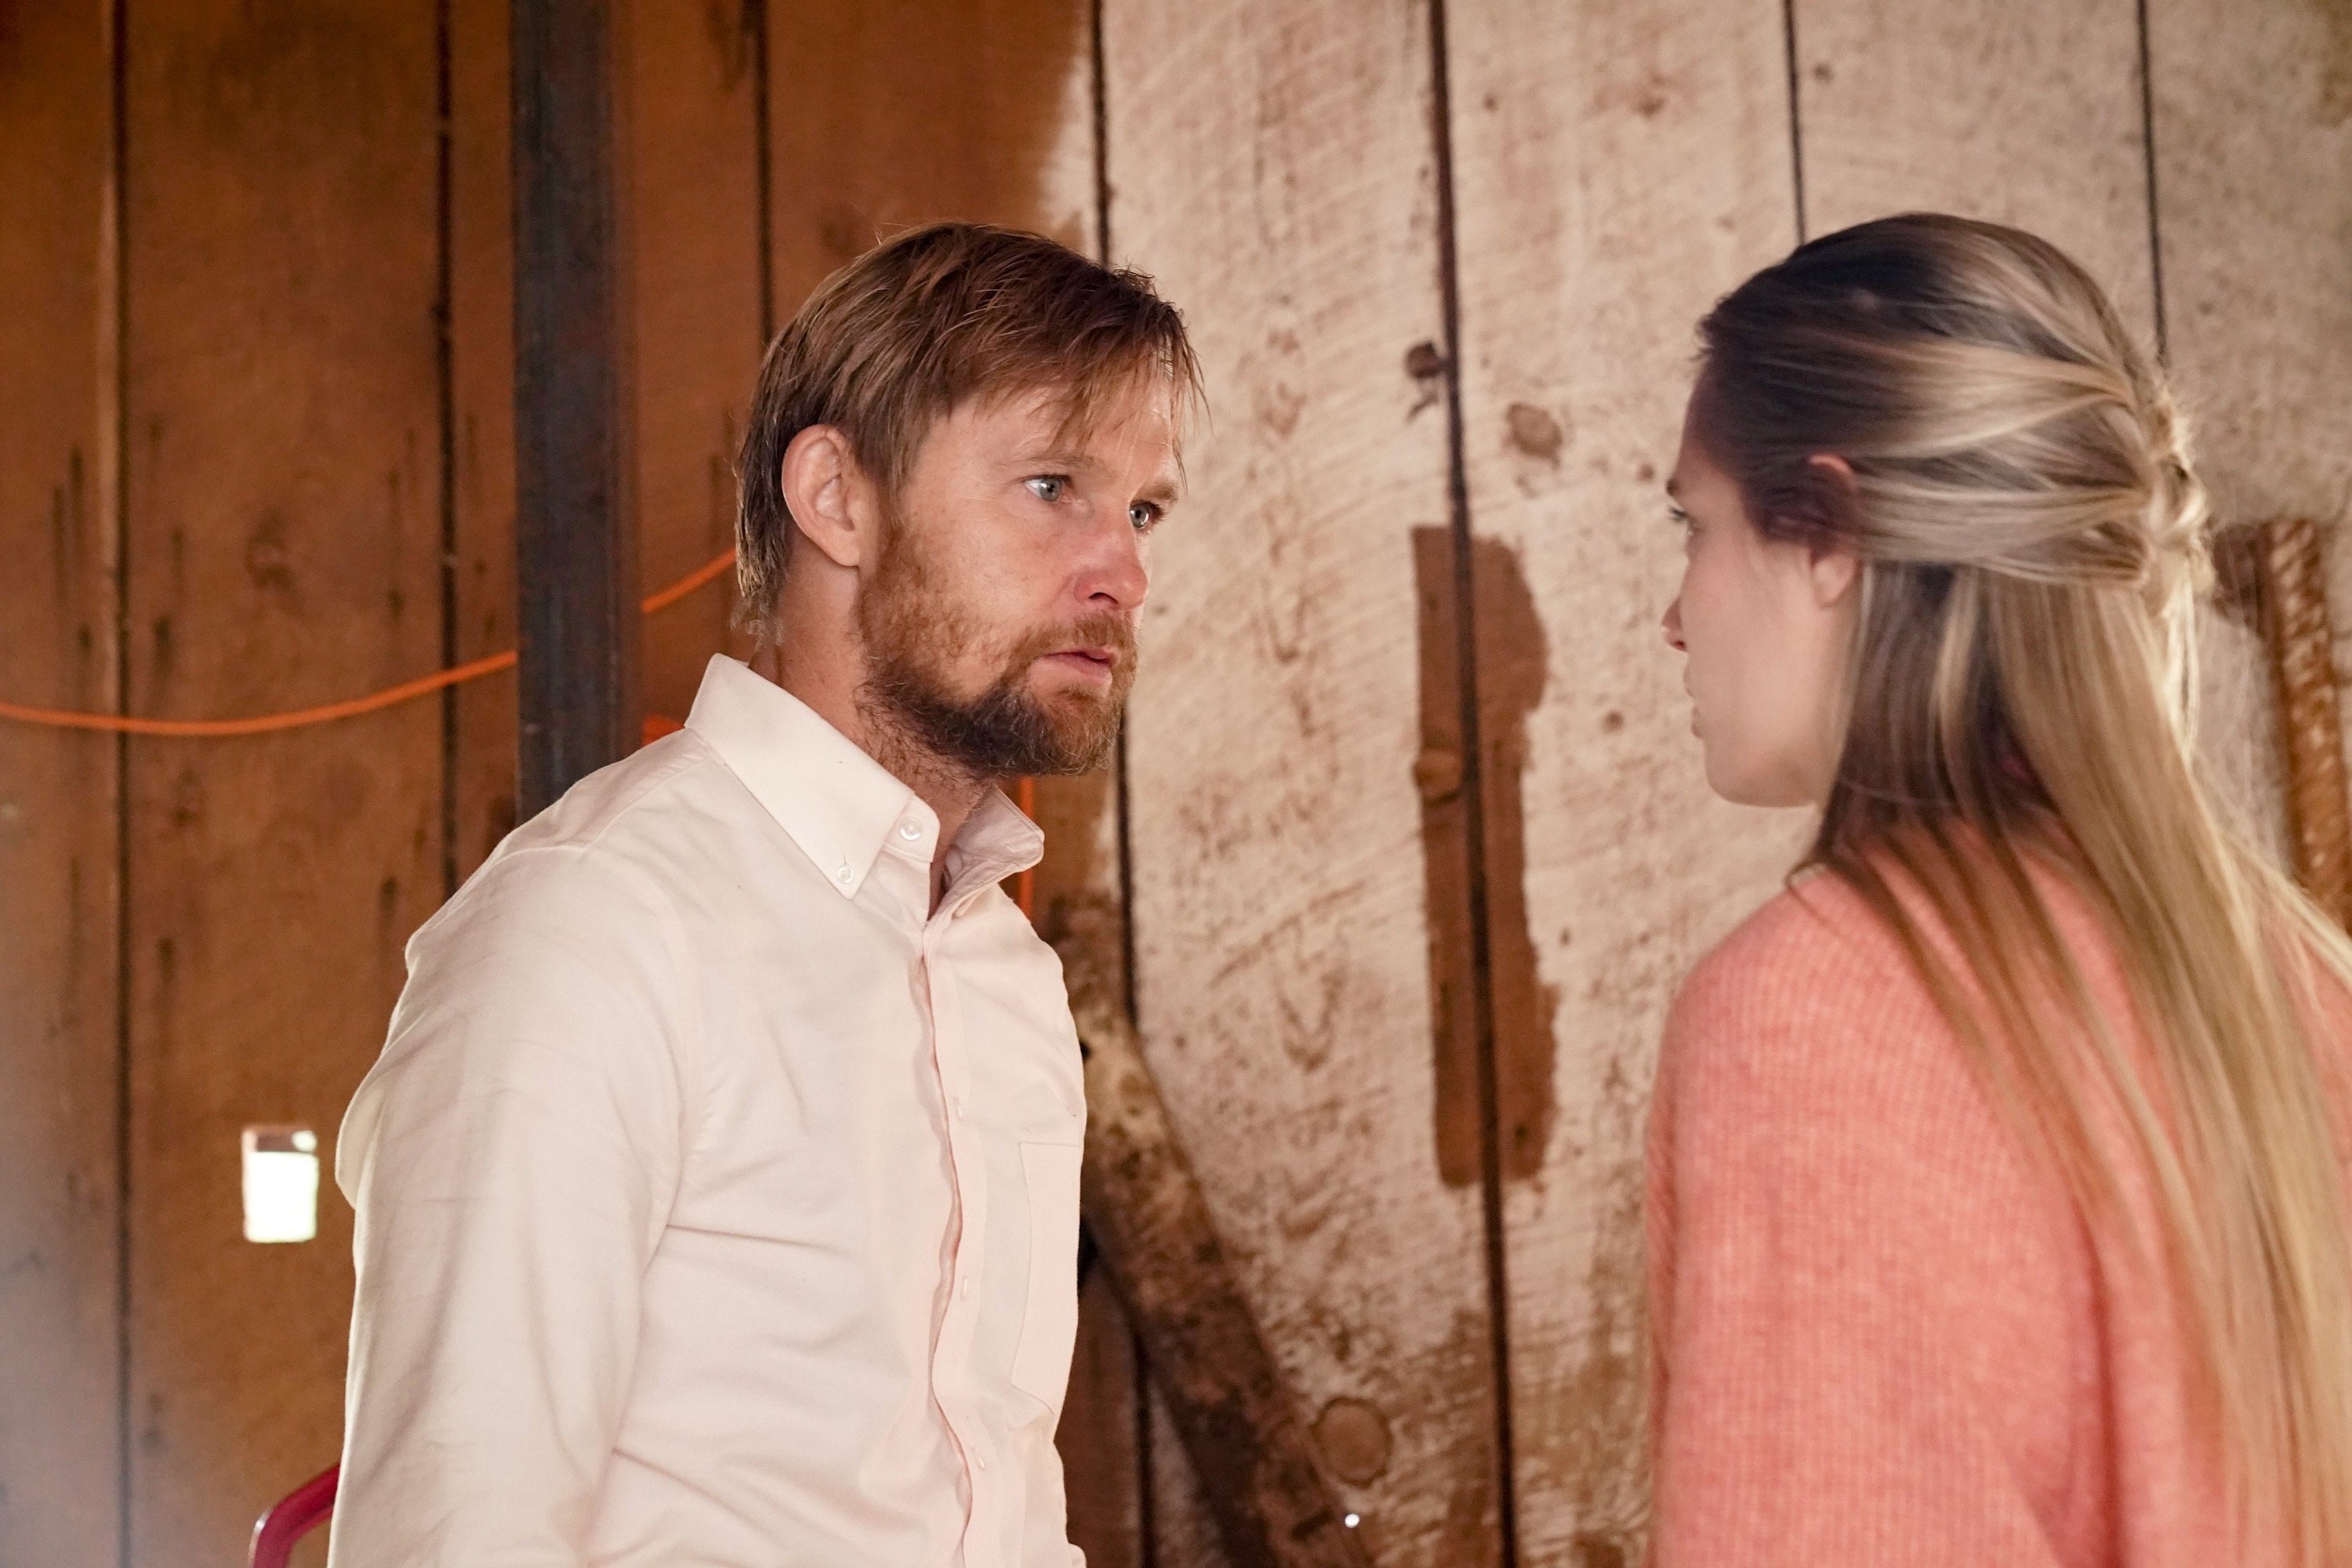 'Big Sky' Season 2 actors Brian Geraghty and Anja Savcic looking at each other